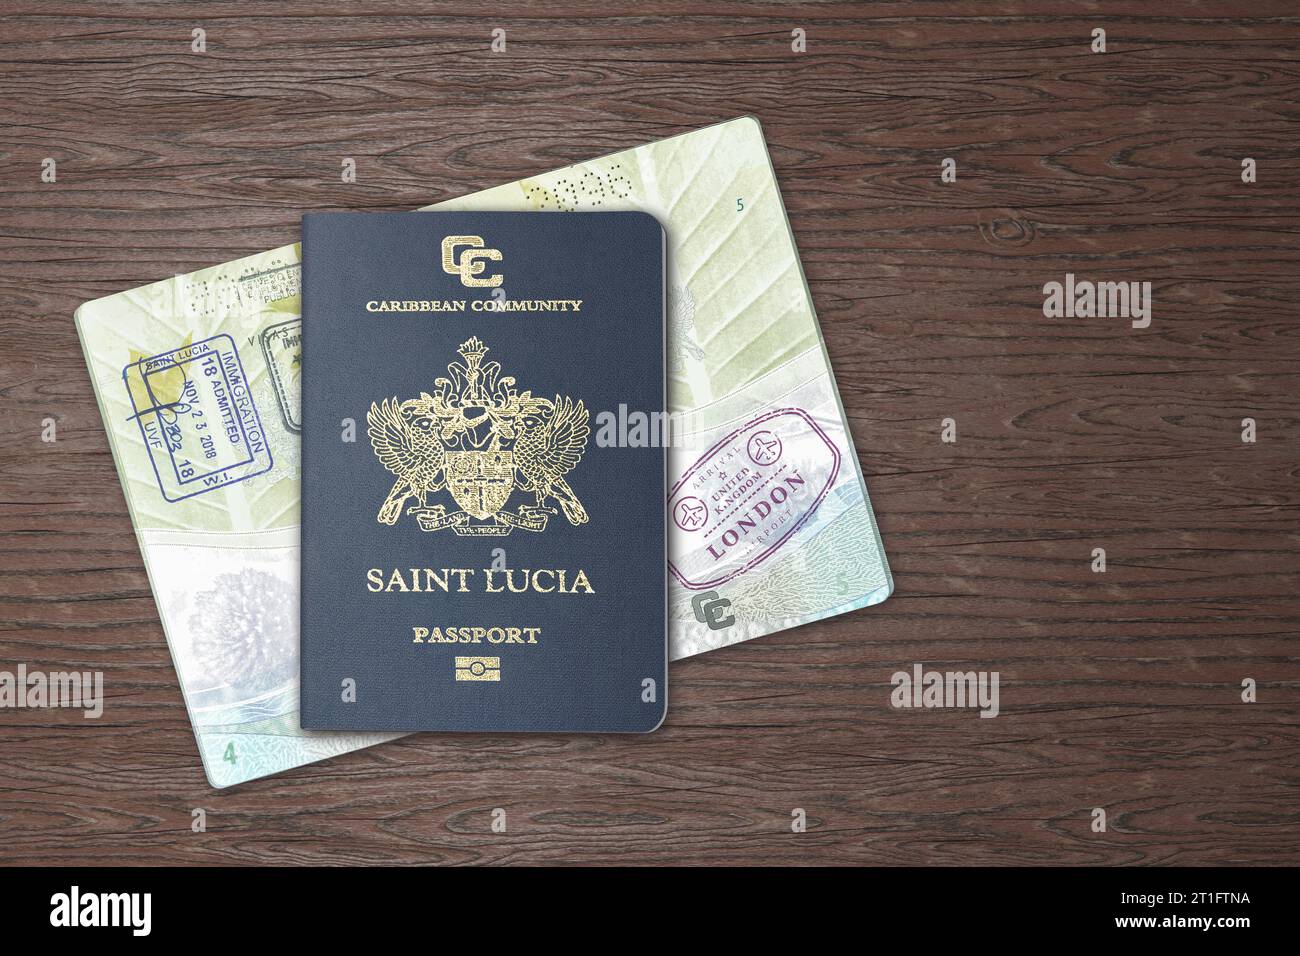 Two Saint Lucia passports, one of them open and showing international airport stamps Stock Photo